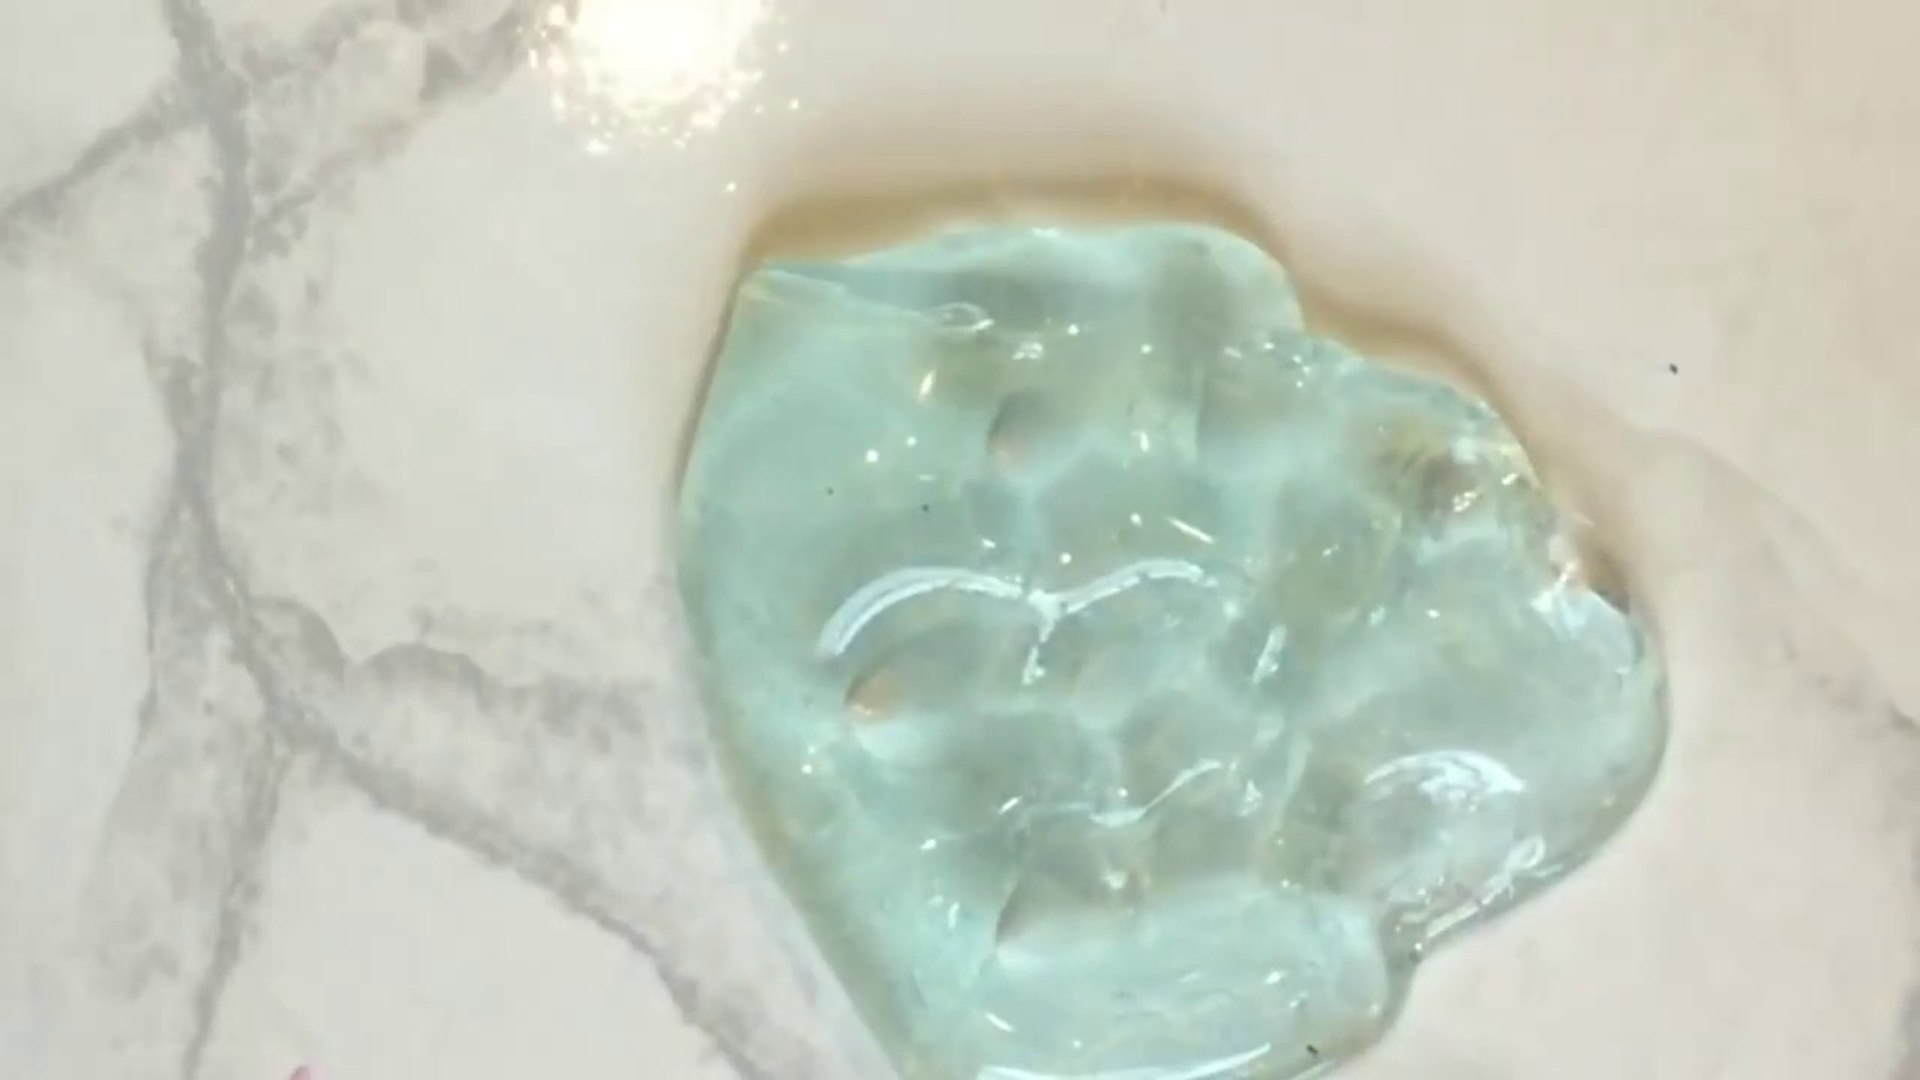 How to Make a Slime Activator with Borax